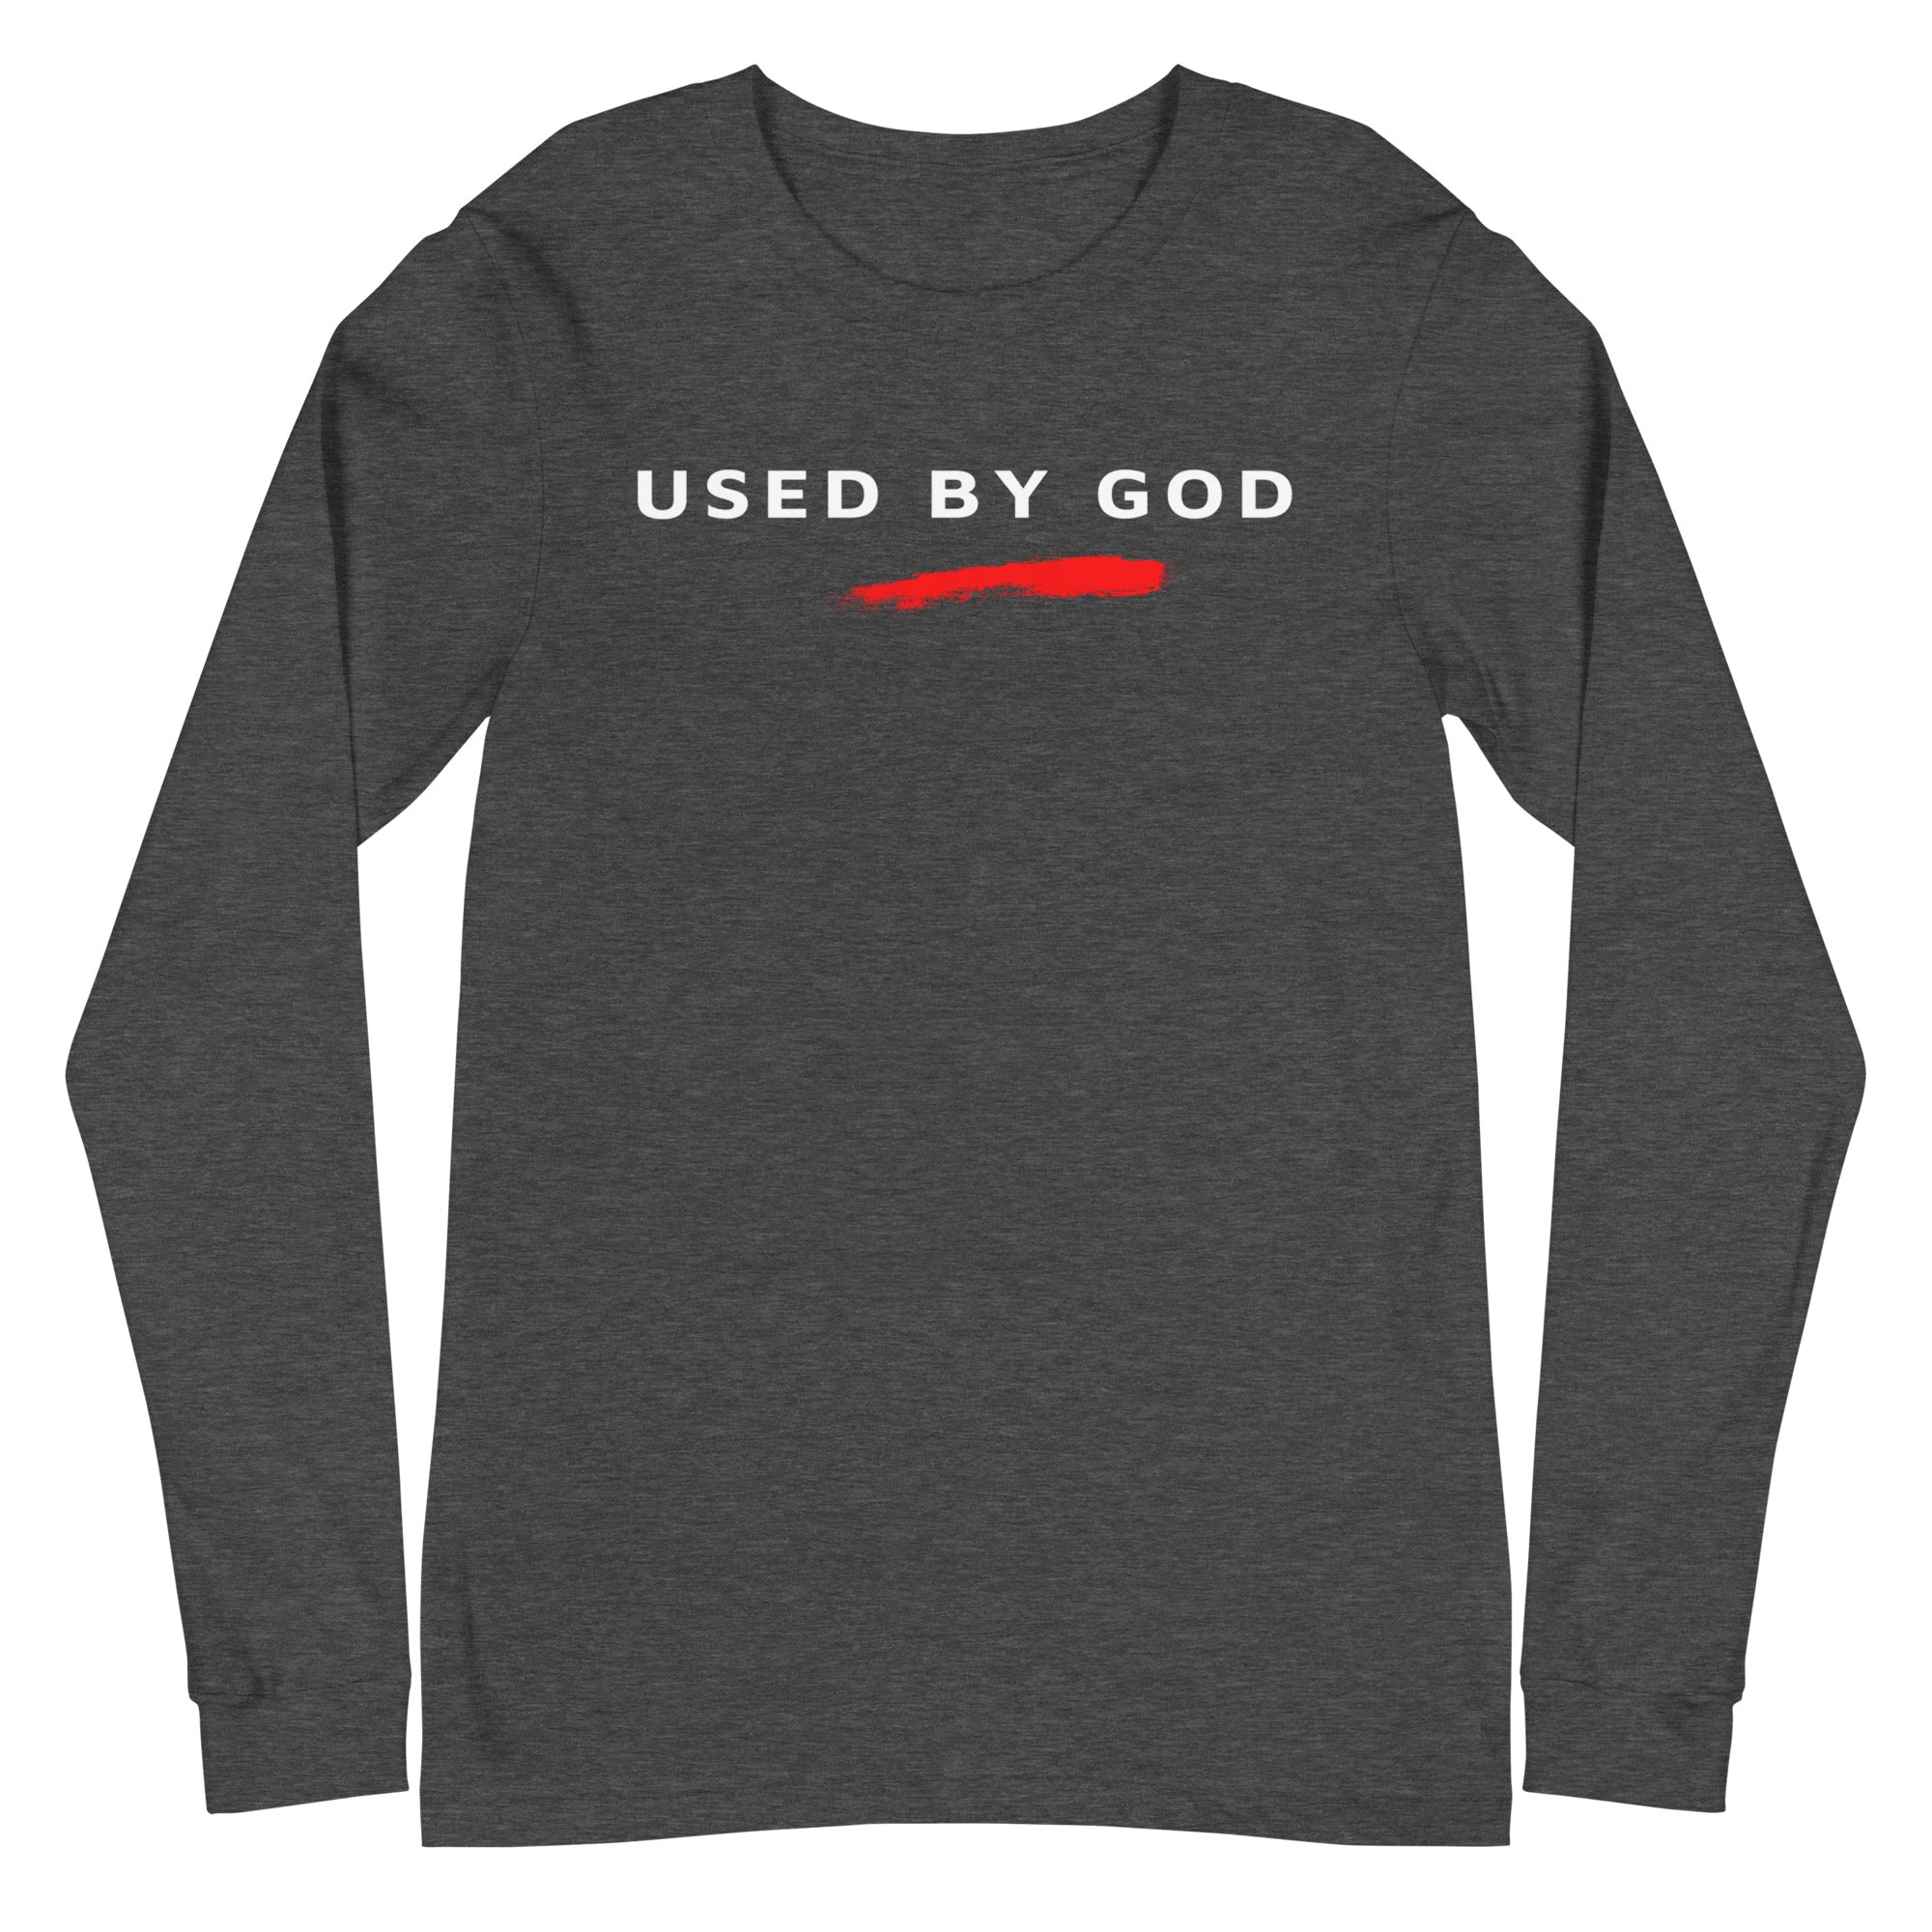 By His Stripes, Used By God, Used By God Clothing, Christian Apparel, Christian T-Shirts, Christian Shirts, christian t shirts for women, Men's Christian T-Shirt, Christian Clothing, God Shirts, christian clothing t shirts, Christian Sweatshirts, womens christian t shirts,t-shirts about jesus, God Clothing, Jesus Hoodie, Jesus Clothes, God Is Dope, Art Of Homage, Red Letter Clothing, Elevated Faith, Beacon Threads, God The Father Apparel